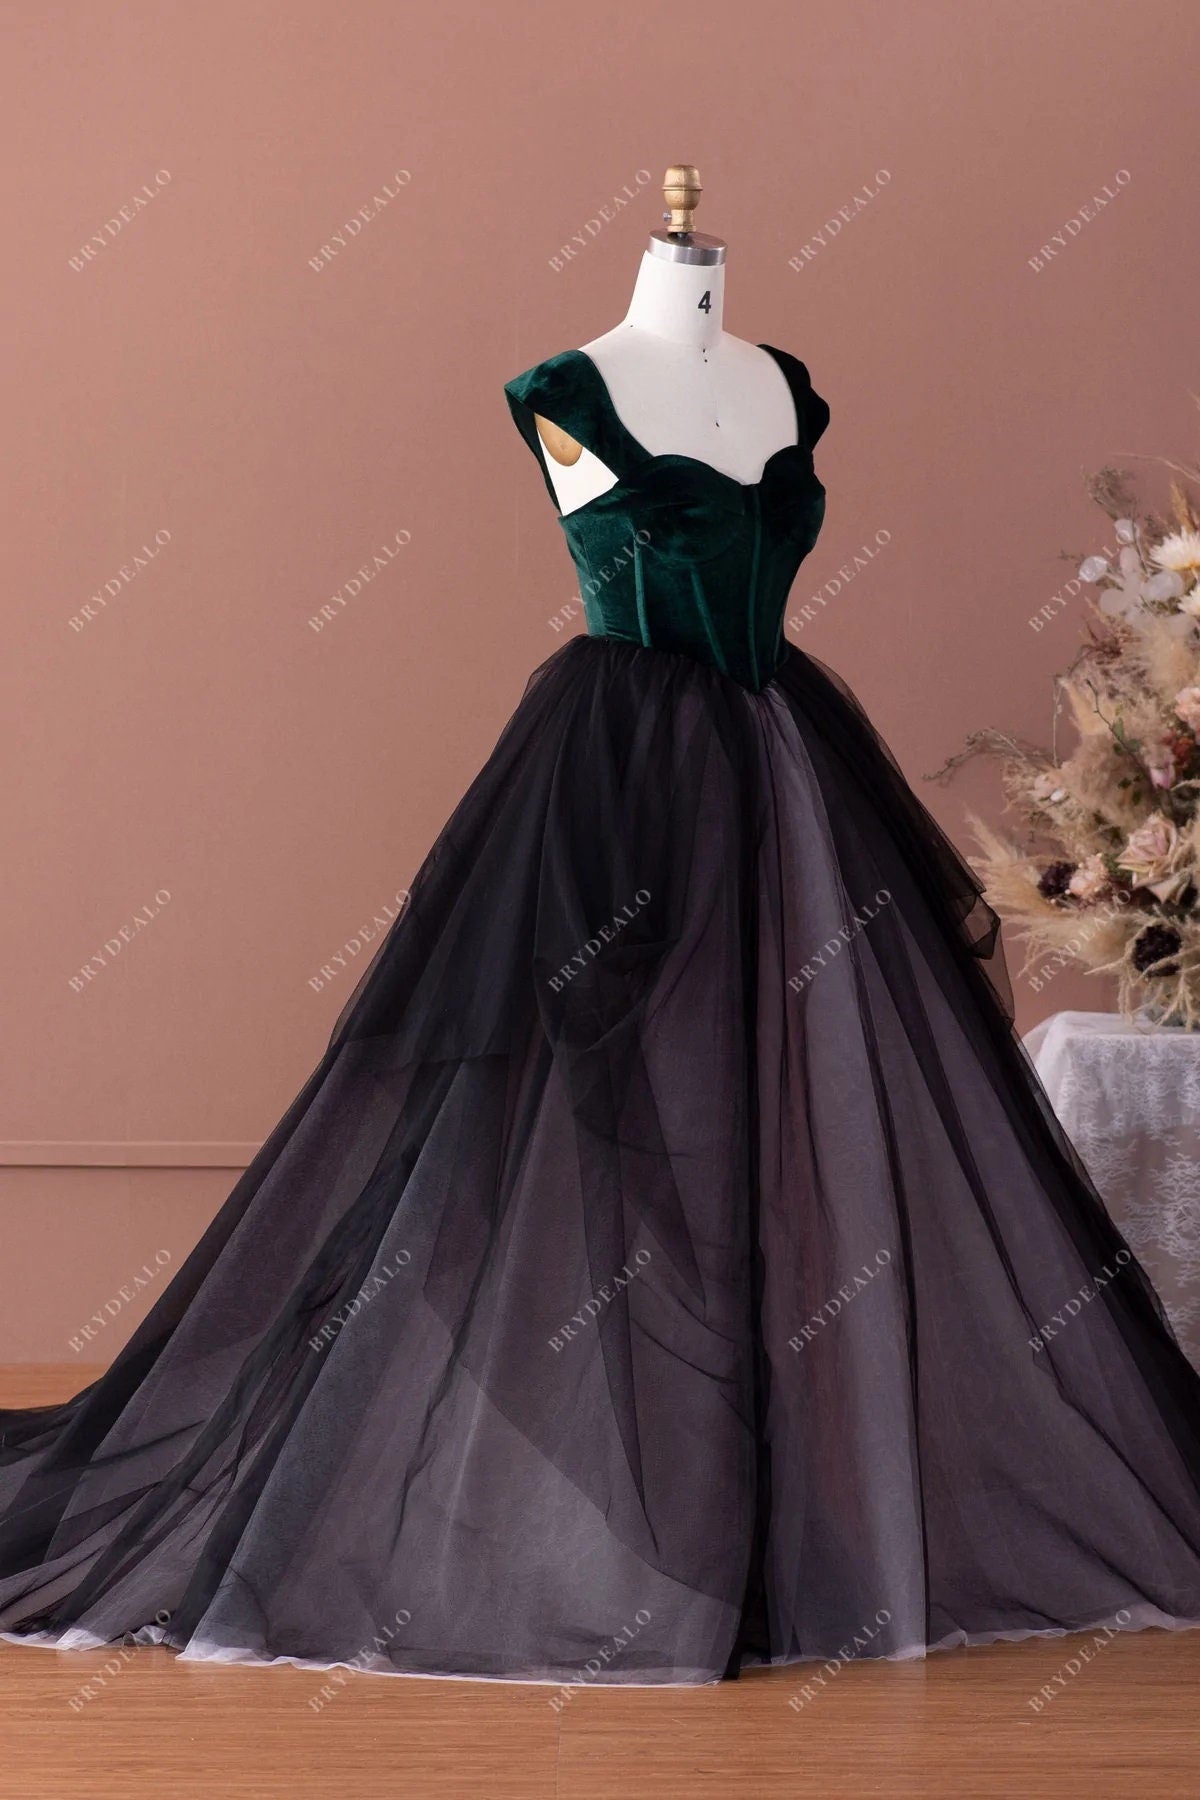 Victoria Velvet Tulle Colored Ballgown Wedding Dress Bridal Gown Custom Colors Gothic Style Boning Puffy 2 Tone Skirt Sweetheart Neckline